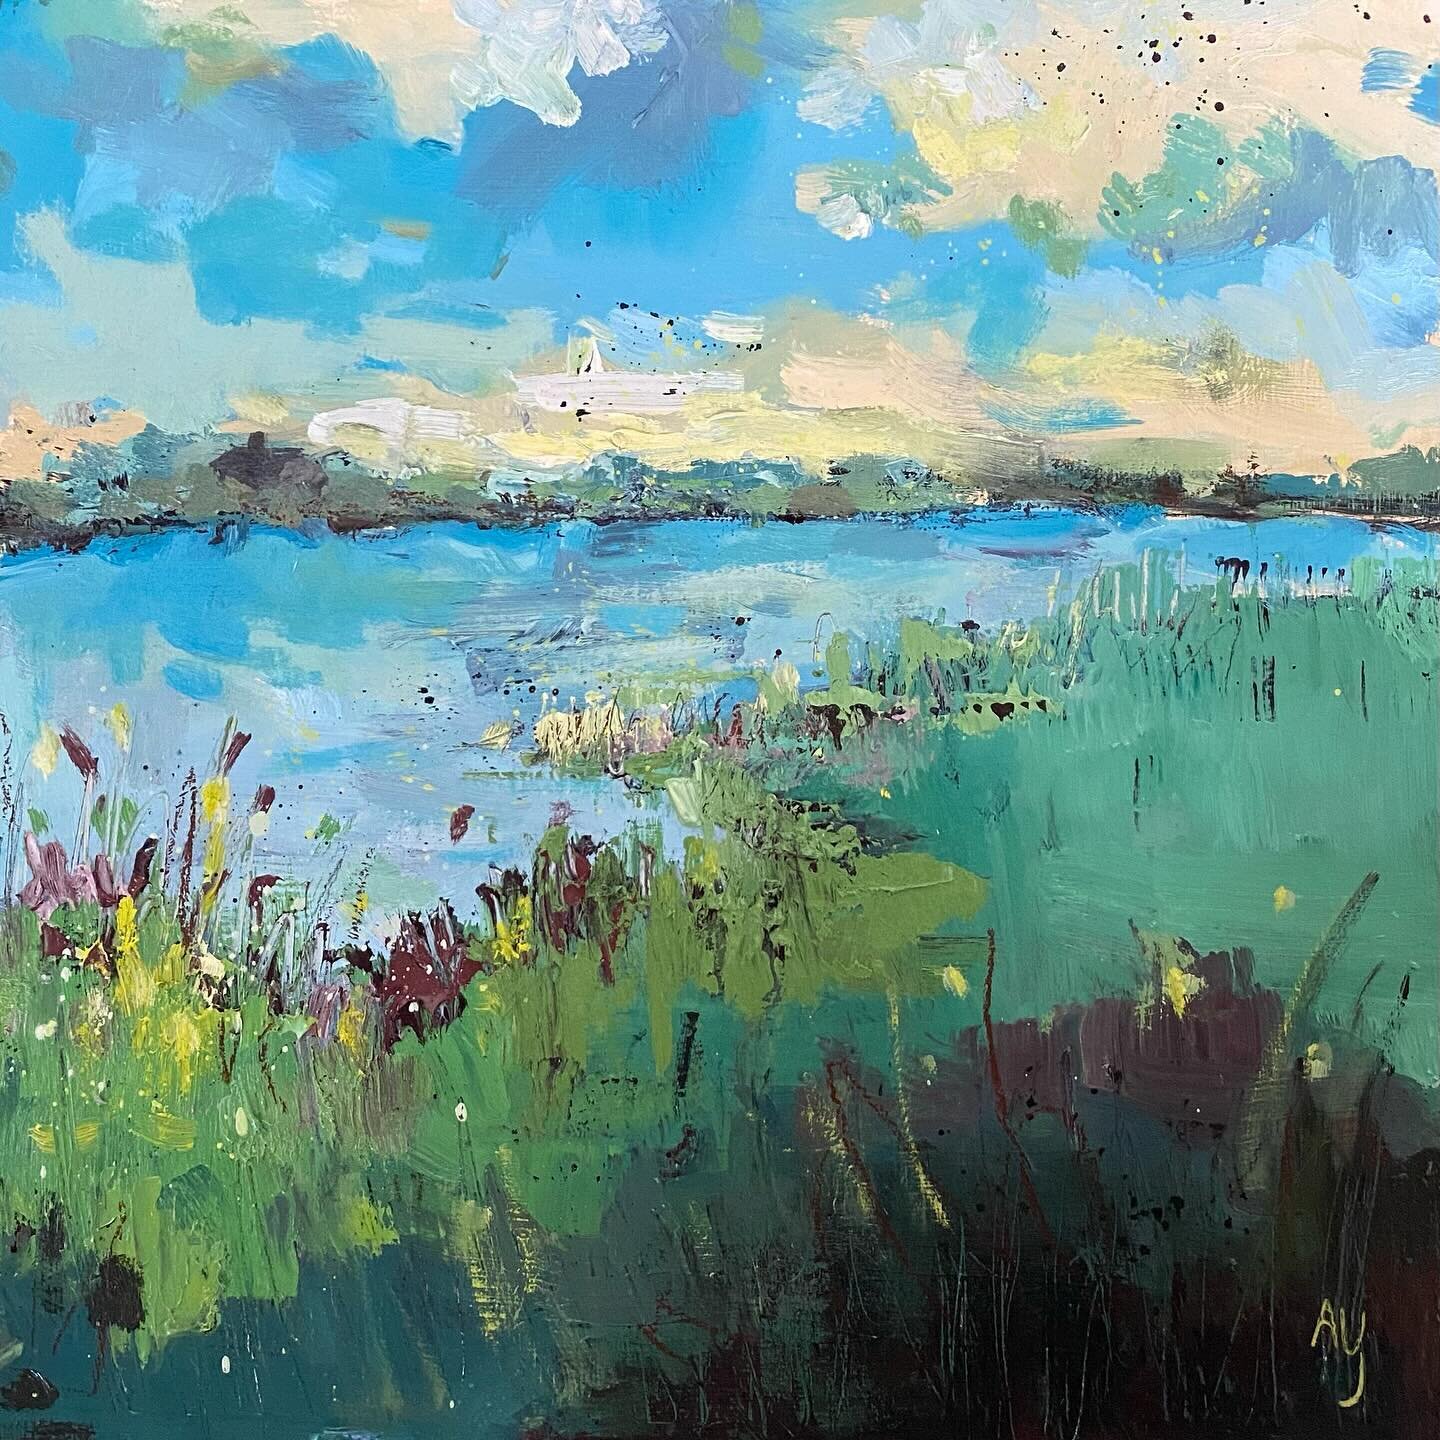 More ponds! Here is &ldquo;Maxcy Pond&rdquo; 12x12 oil on panel. You can see the original picture with my kids fishing in it. Wishing we were fishing right about now. Available on my website - link in bio. 
.
.
#oilpainting #landscapepainting #nantuc